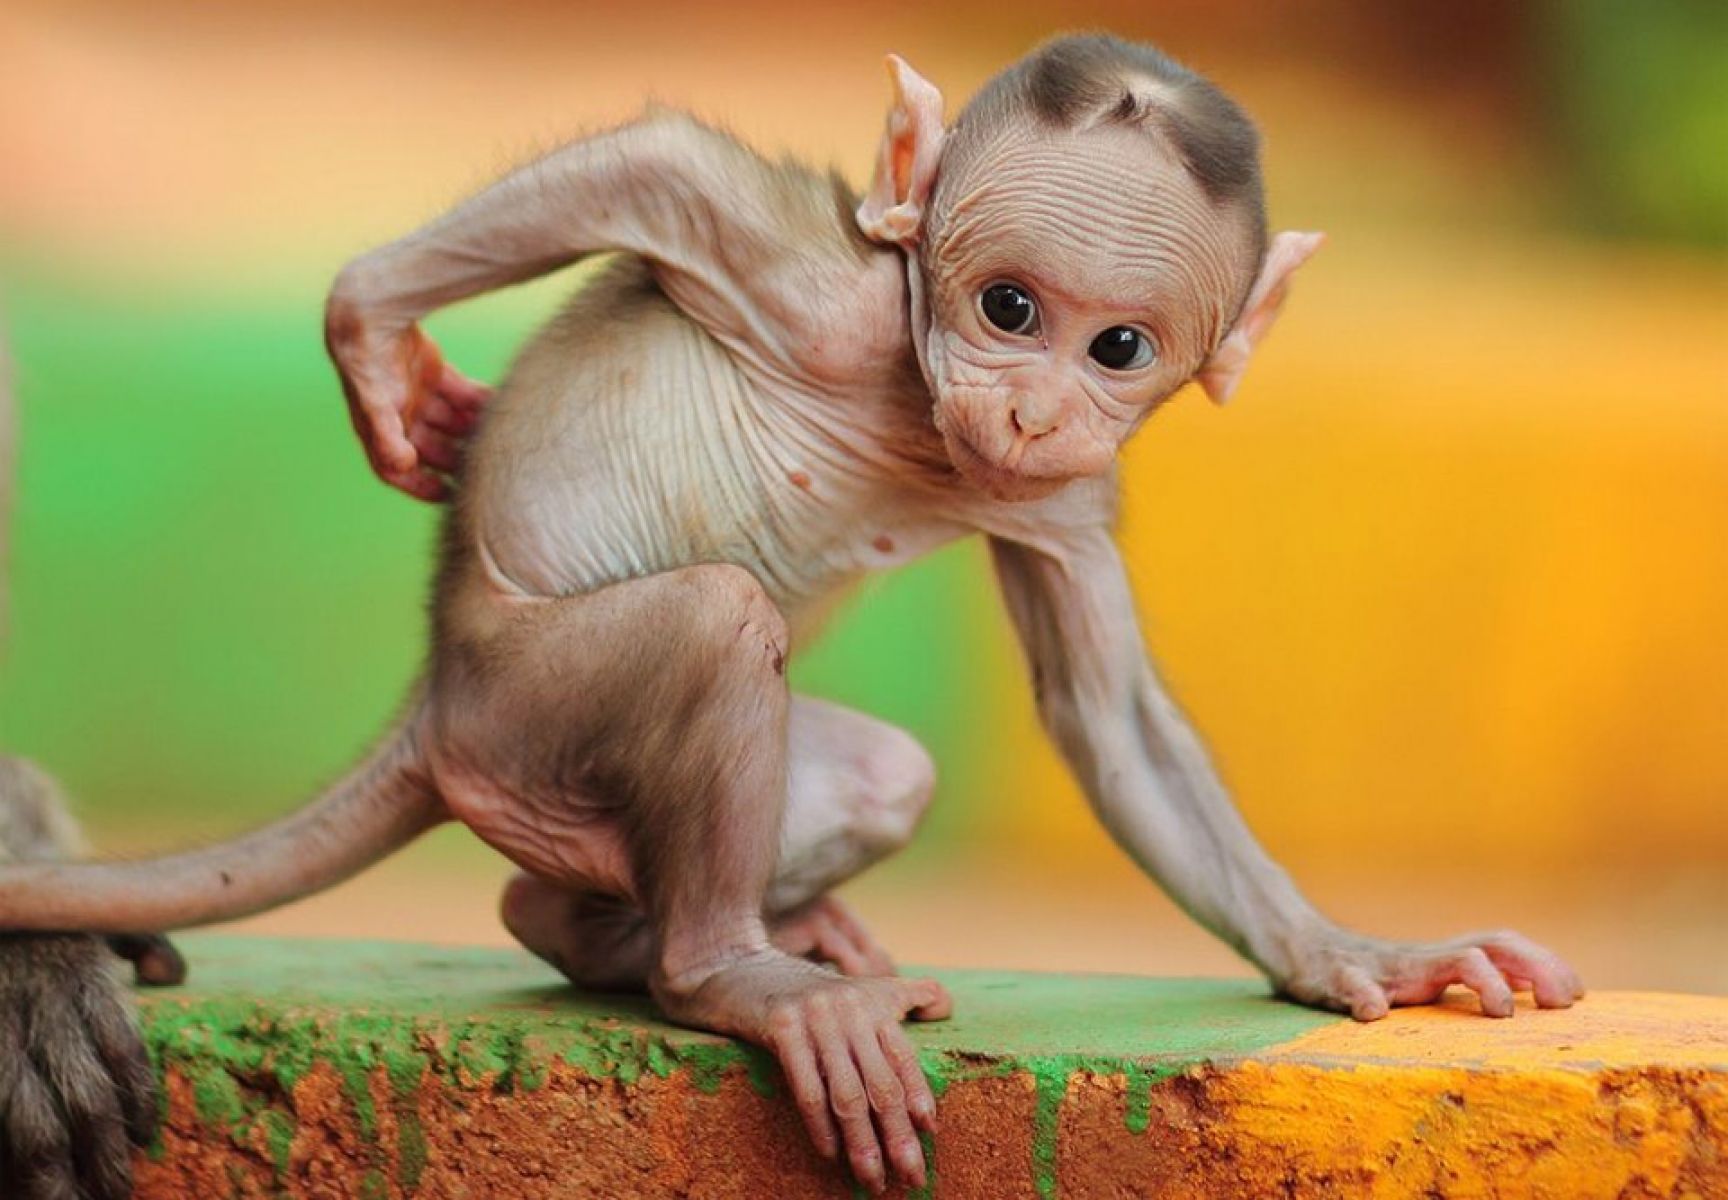 Hairless Baby Macaque Monkey. HD Animals and Birds Wallpaper